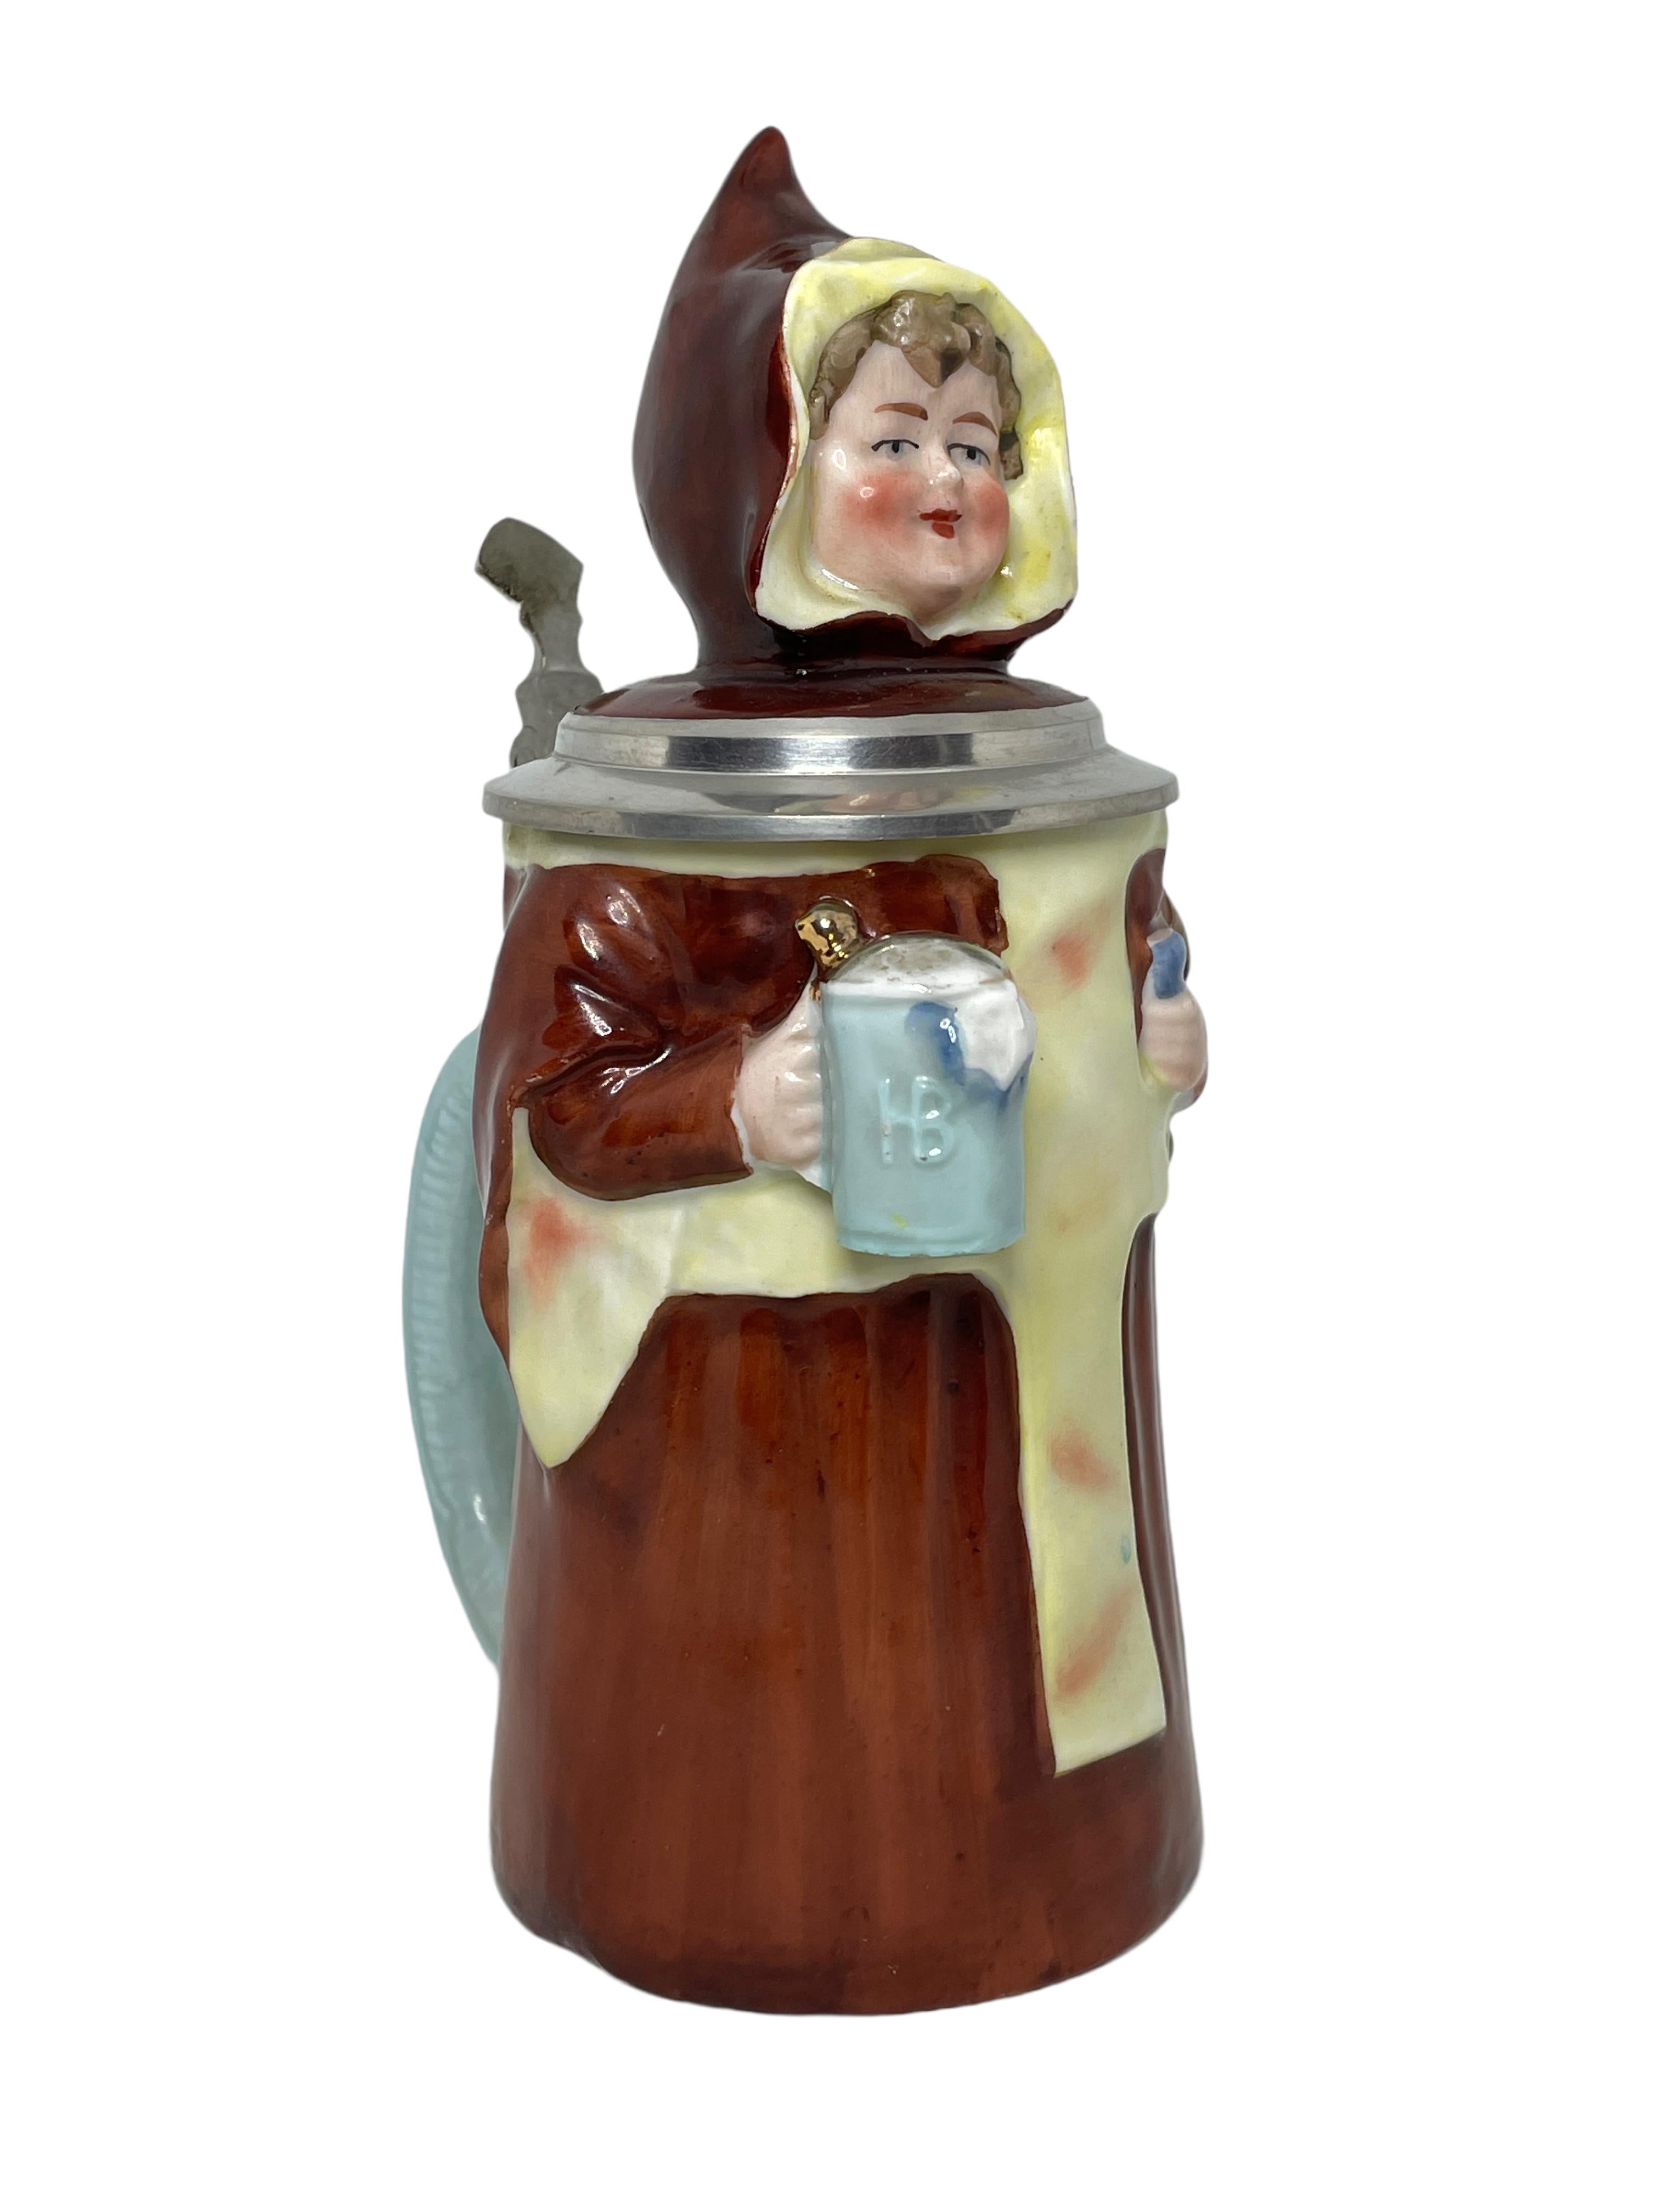 A gorgeous Character Beer Stein - Munich Child. This character beer stein has been made in Germany circa 1900s by E. Bohne, Thuringia Germany. Absolutely gorgeous piece hand painted and still in great condition. Lid works properly.